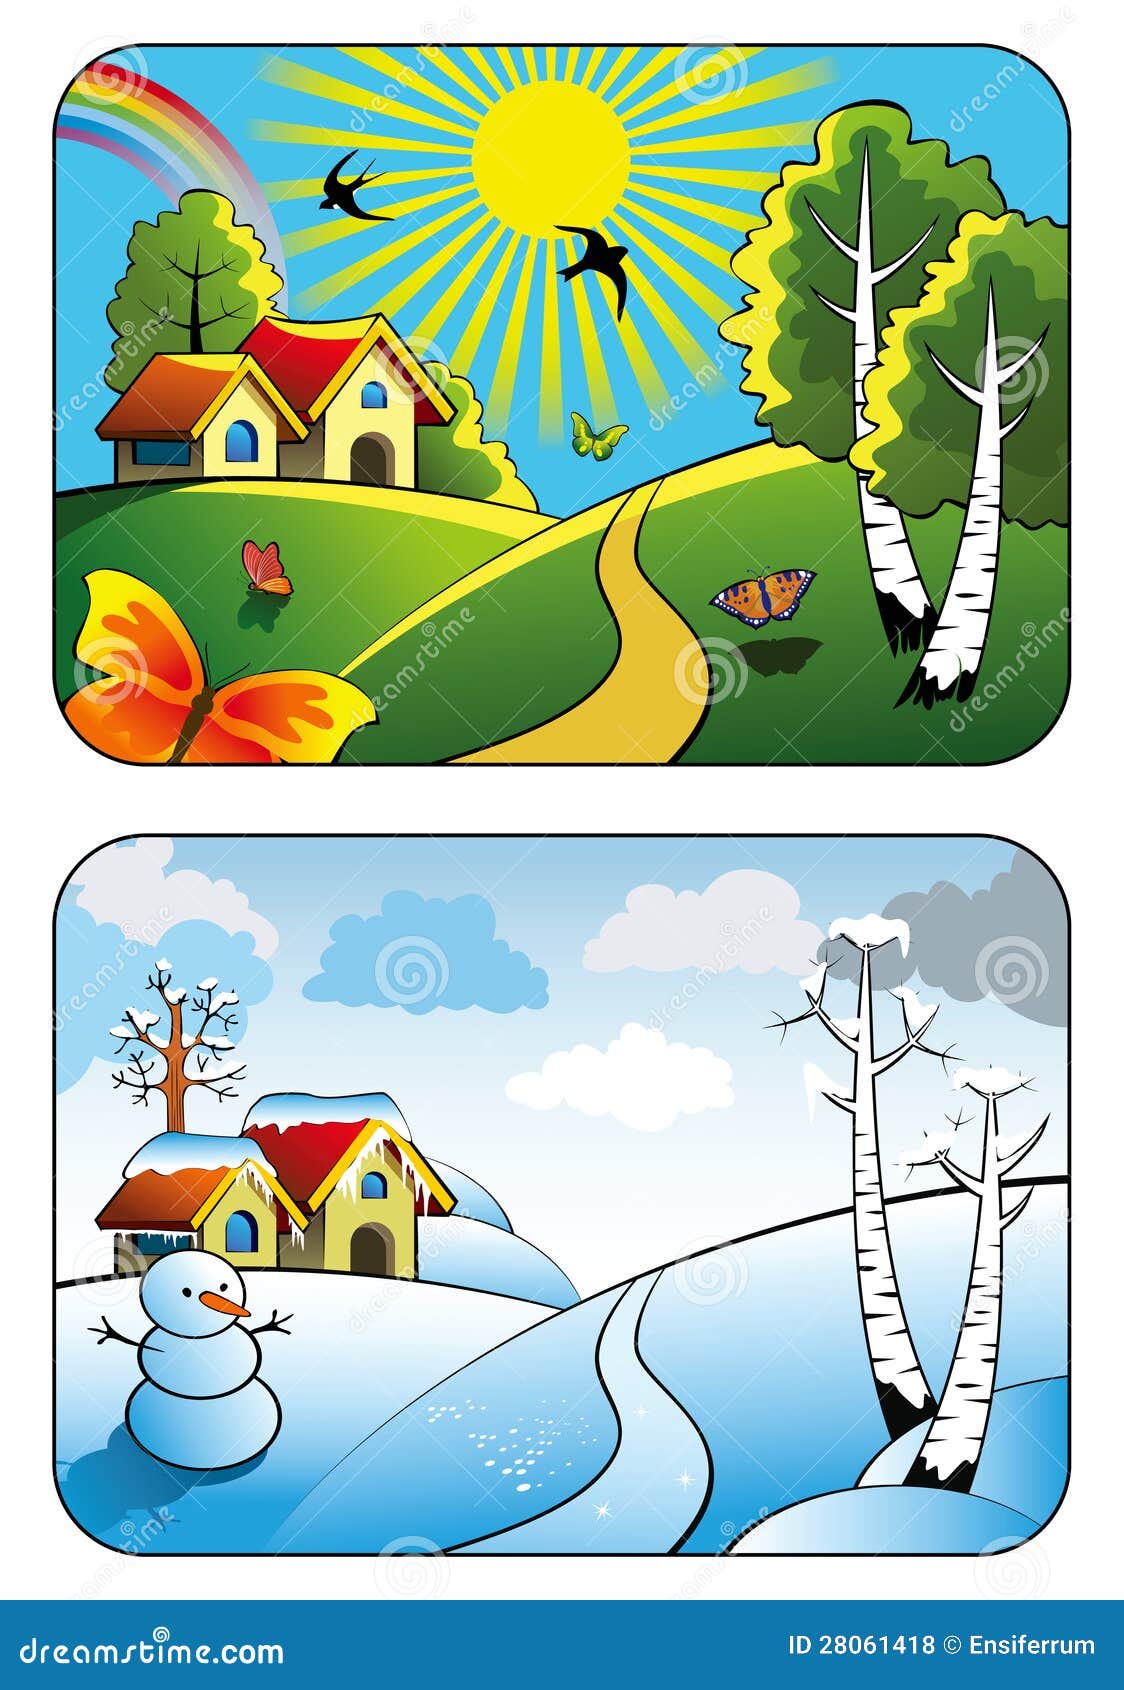 clipart pictures of summer season - photo #33